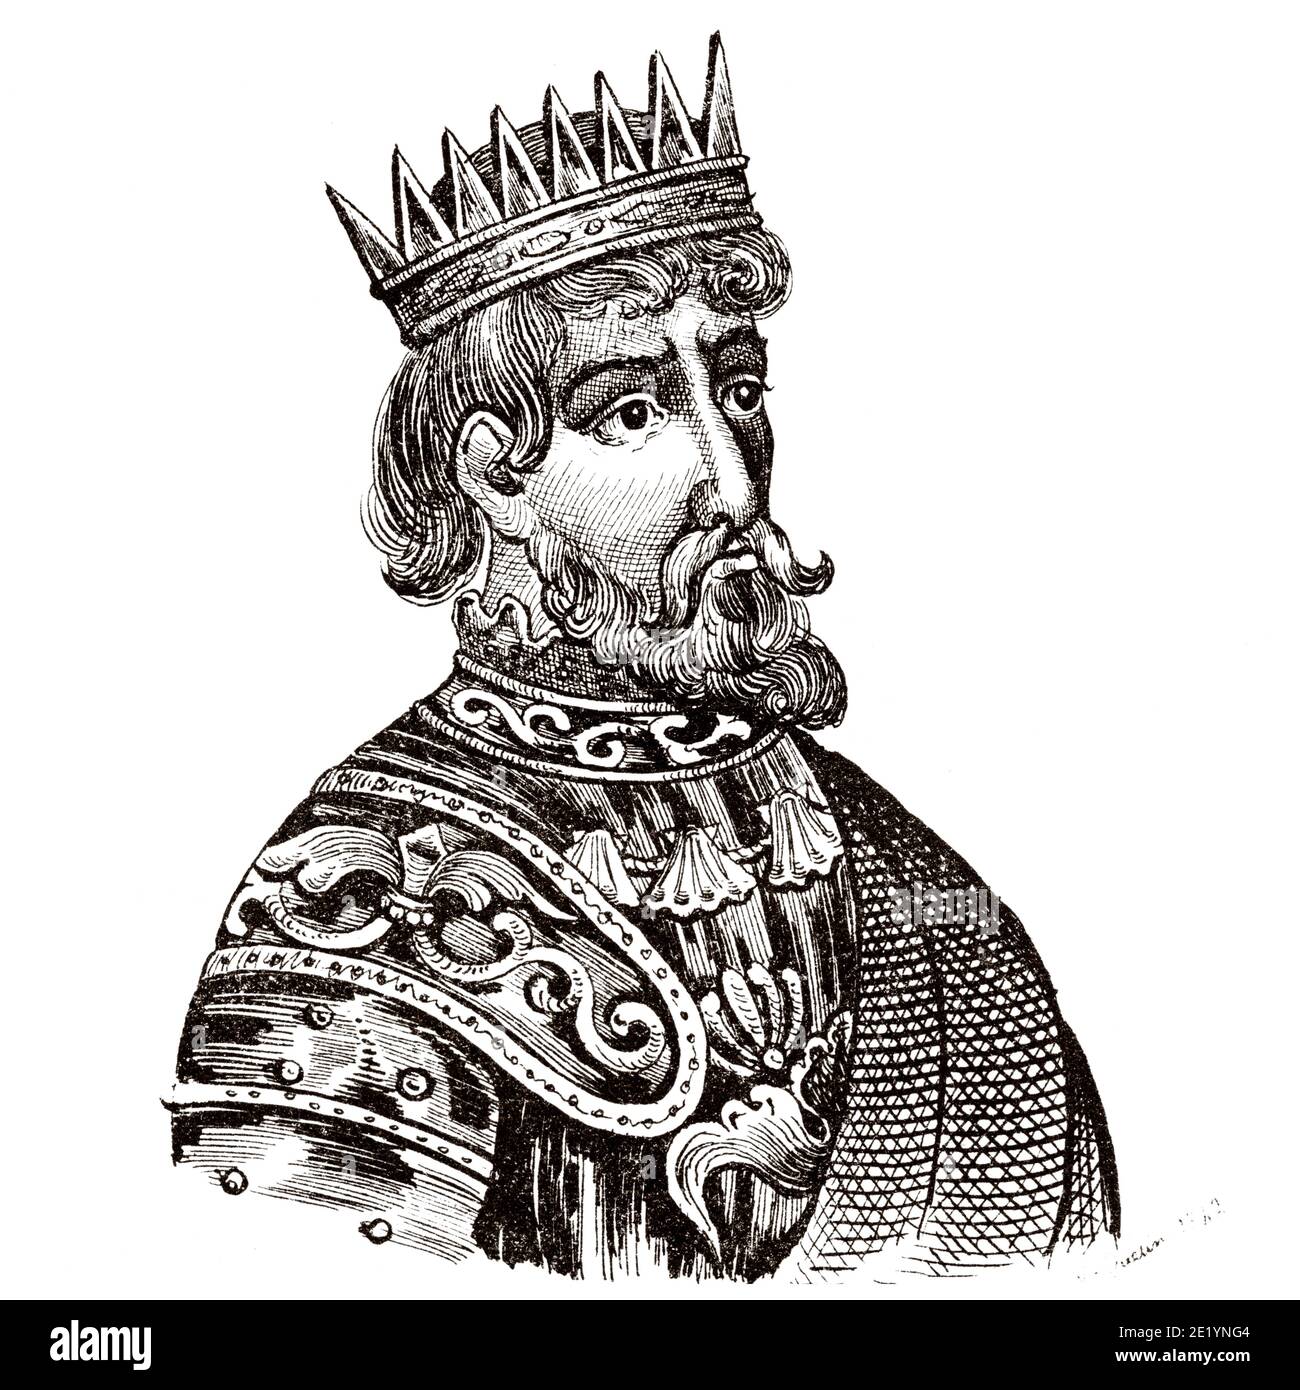 Portrait of Henri II (1519 - 1559). King of France from 1547 to 1559. Valois–Angoulême Branch. History of France, from the book Atlas de la France 1842 Stock Photo